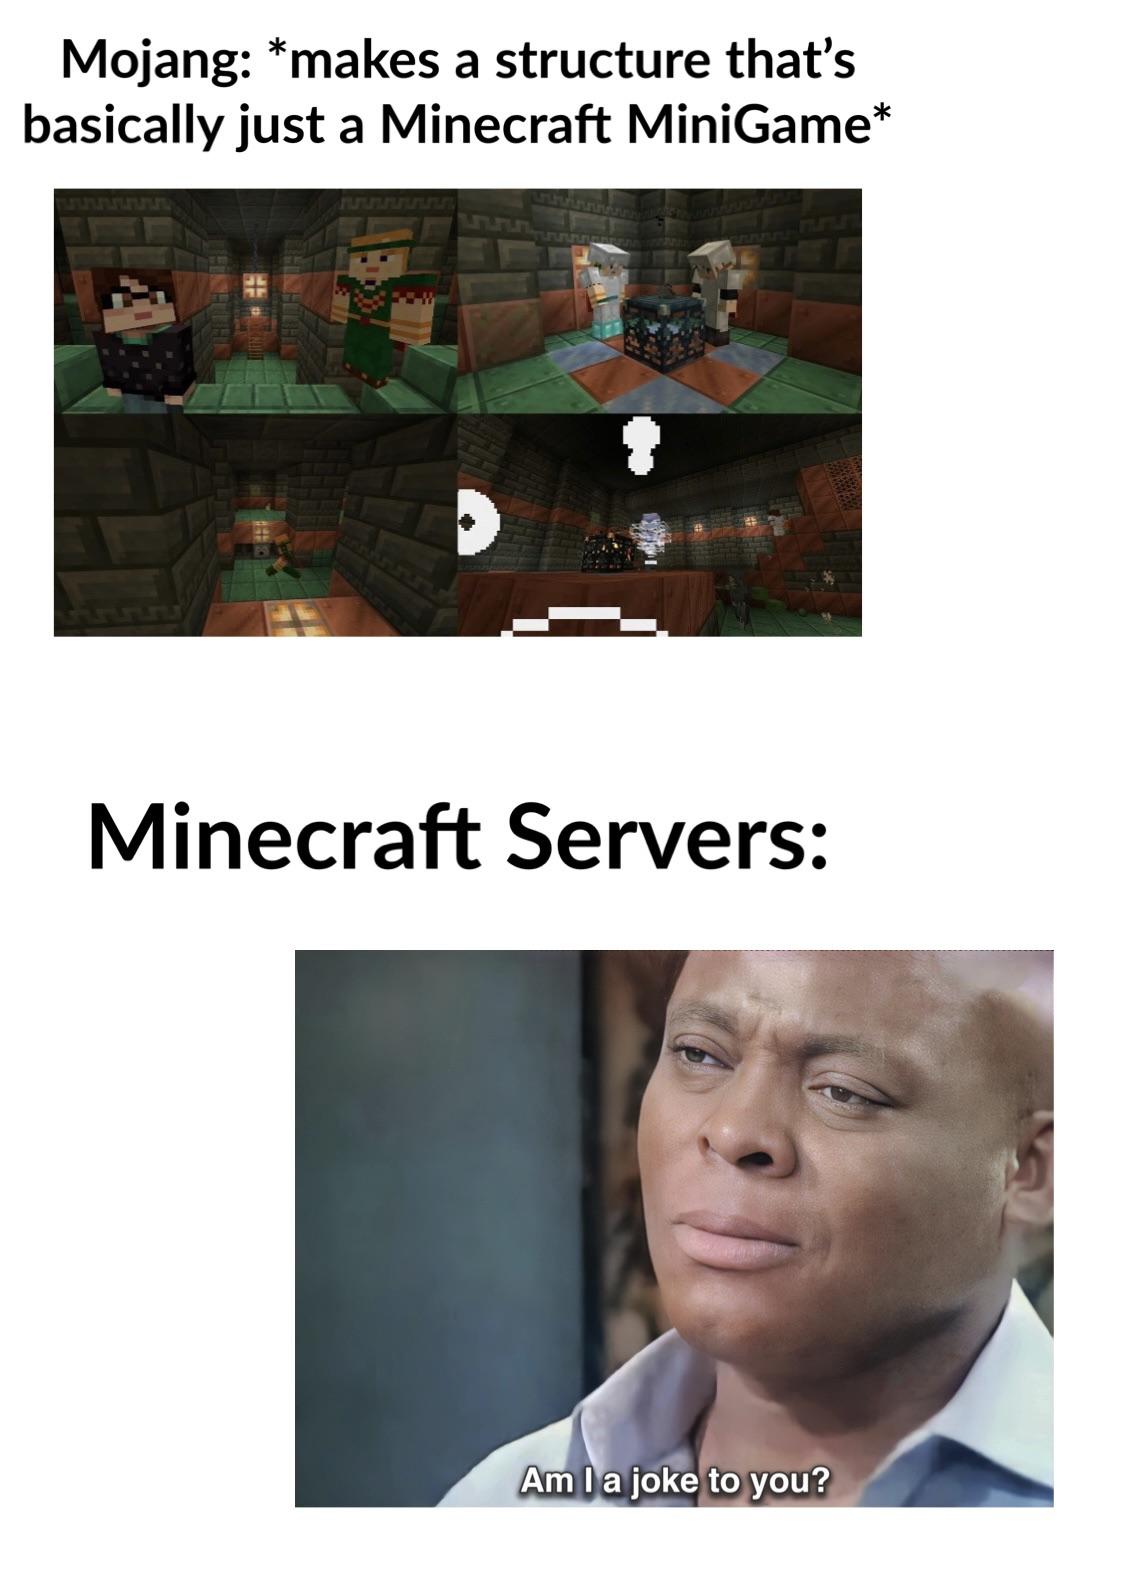 Minecraft Memes - Seriously tho how does this fit into the lore of Minecraft Mojang?